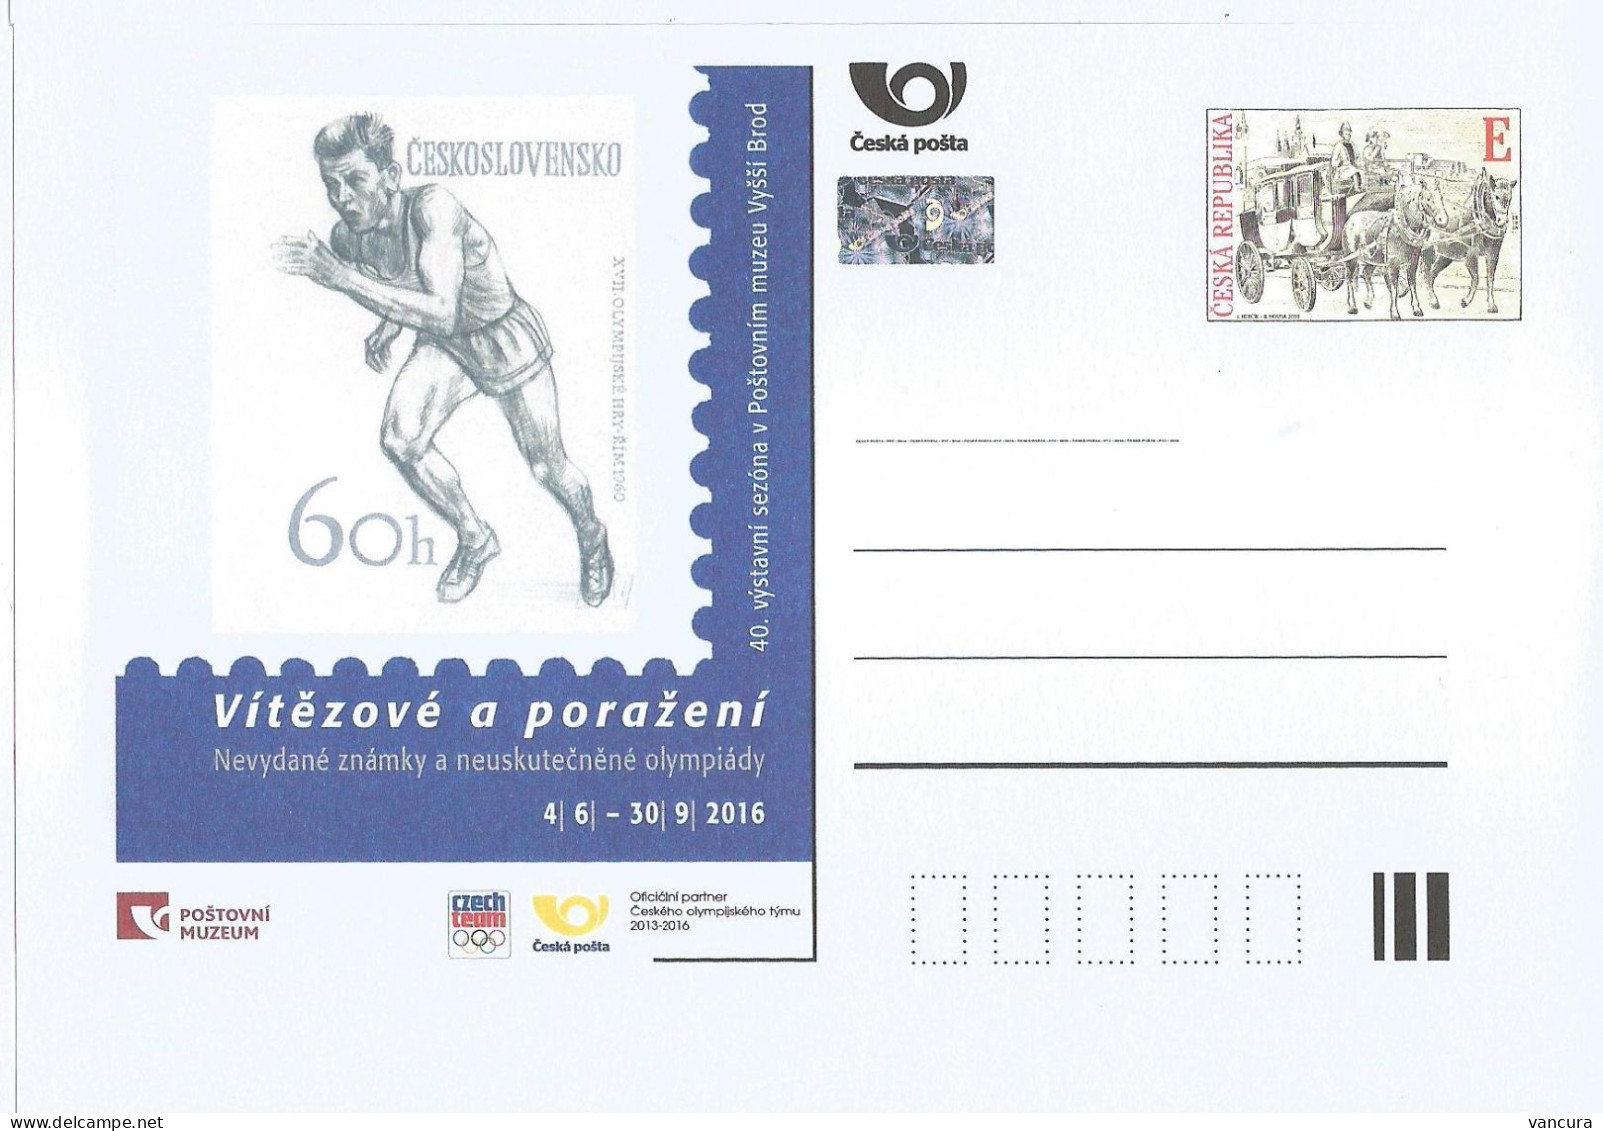 CDV PM 112 Czech Republic Exhibition In Post Museumin Vyssi Brod/Hohenfurth - Unissued Designs Of Olympic Stamps 2016 - Ete 1960: Rome